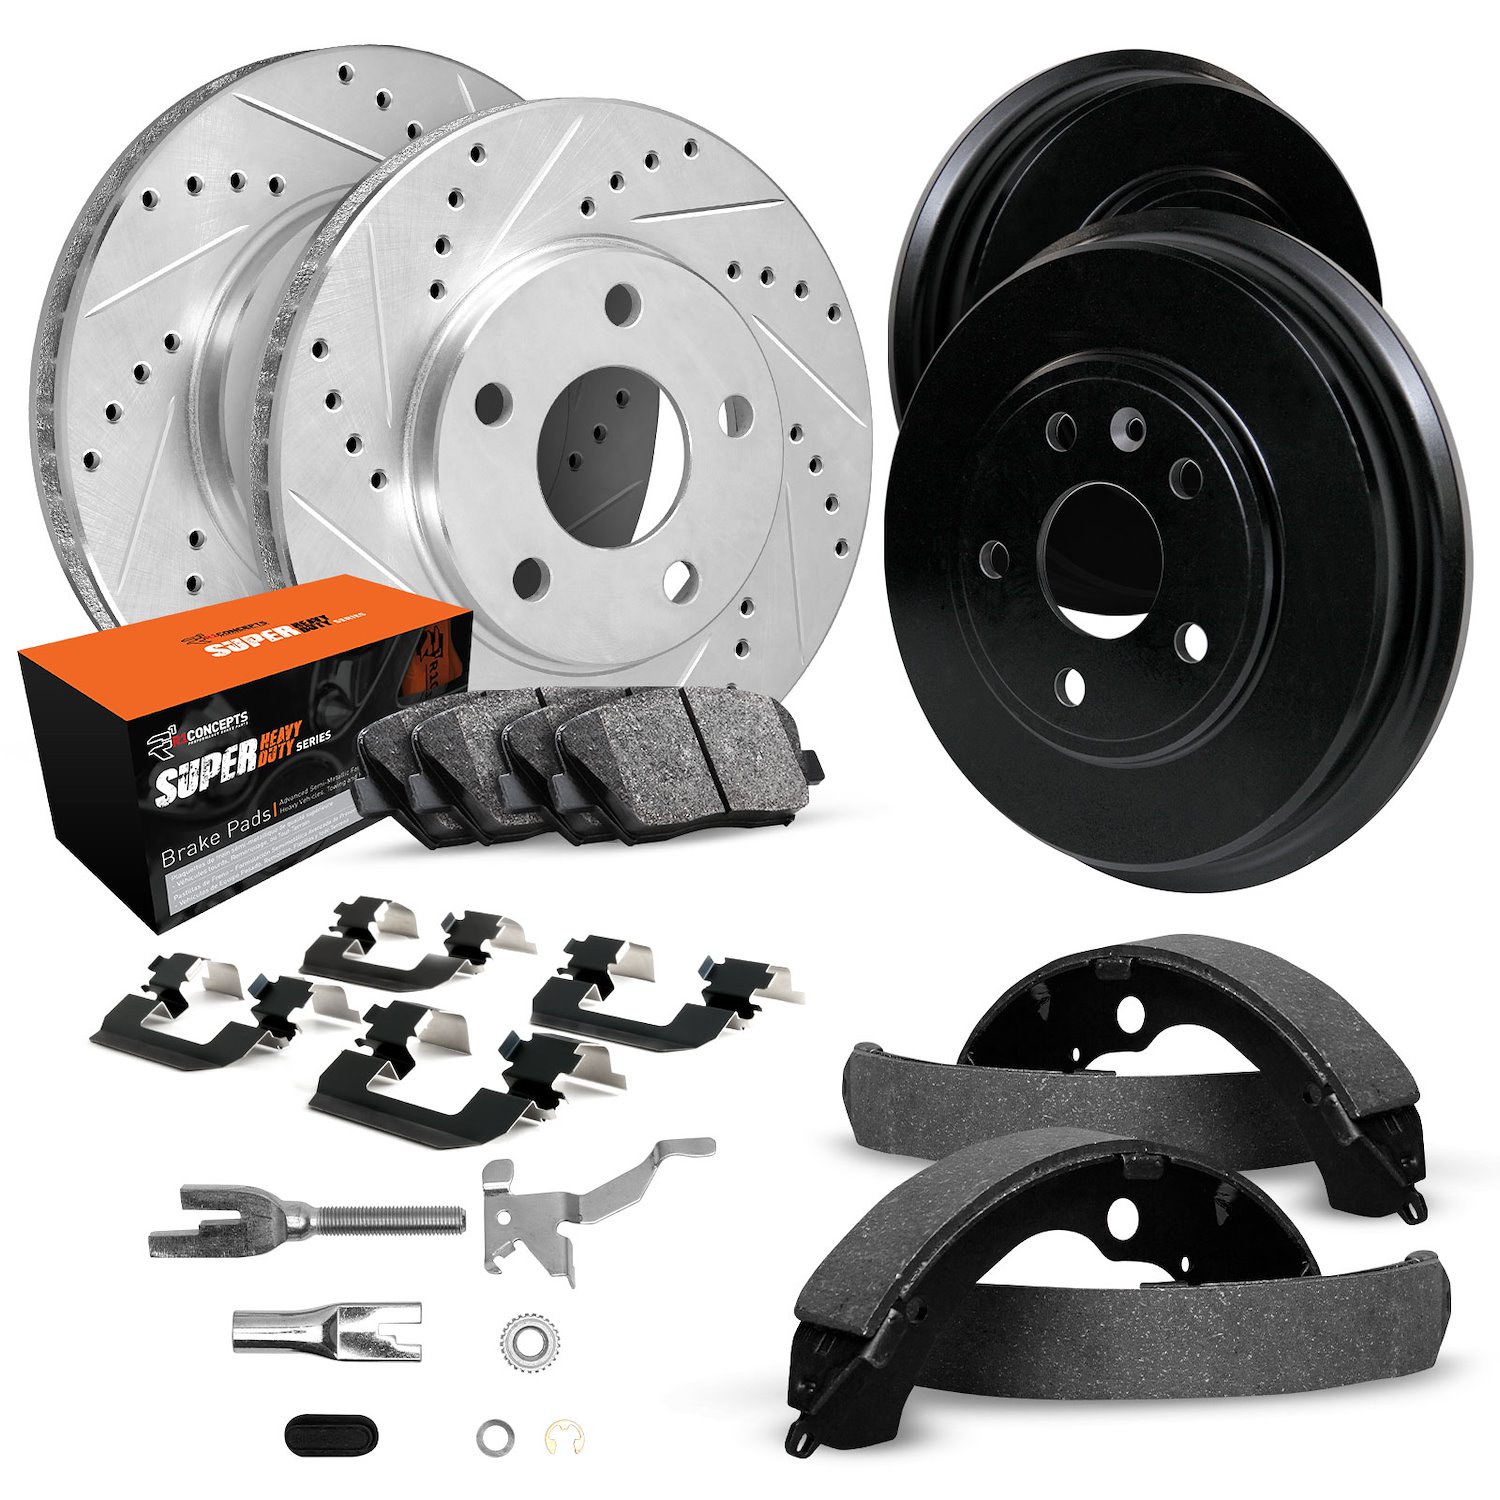 E-Line Drilled/Slotted Silver Rotor & Drum Set w/Super-Duty Pads, Shoes/Hardware/Adjusters, 1984-1985 Ford/Lincoln/Mercury/Mazda